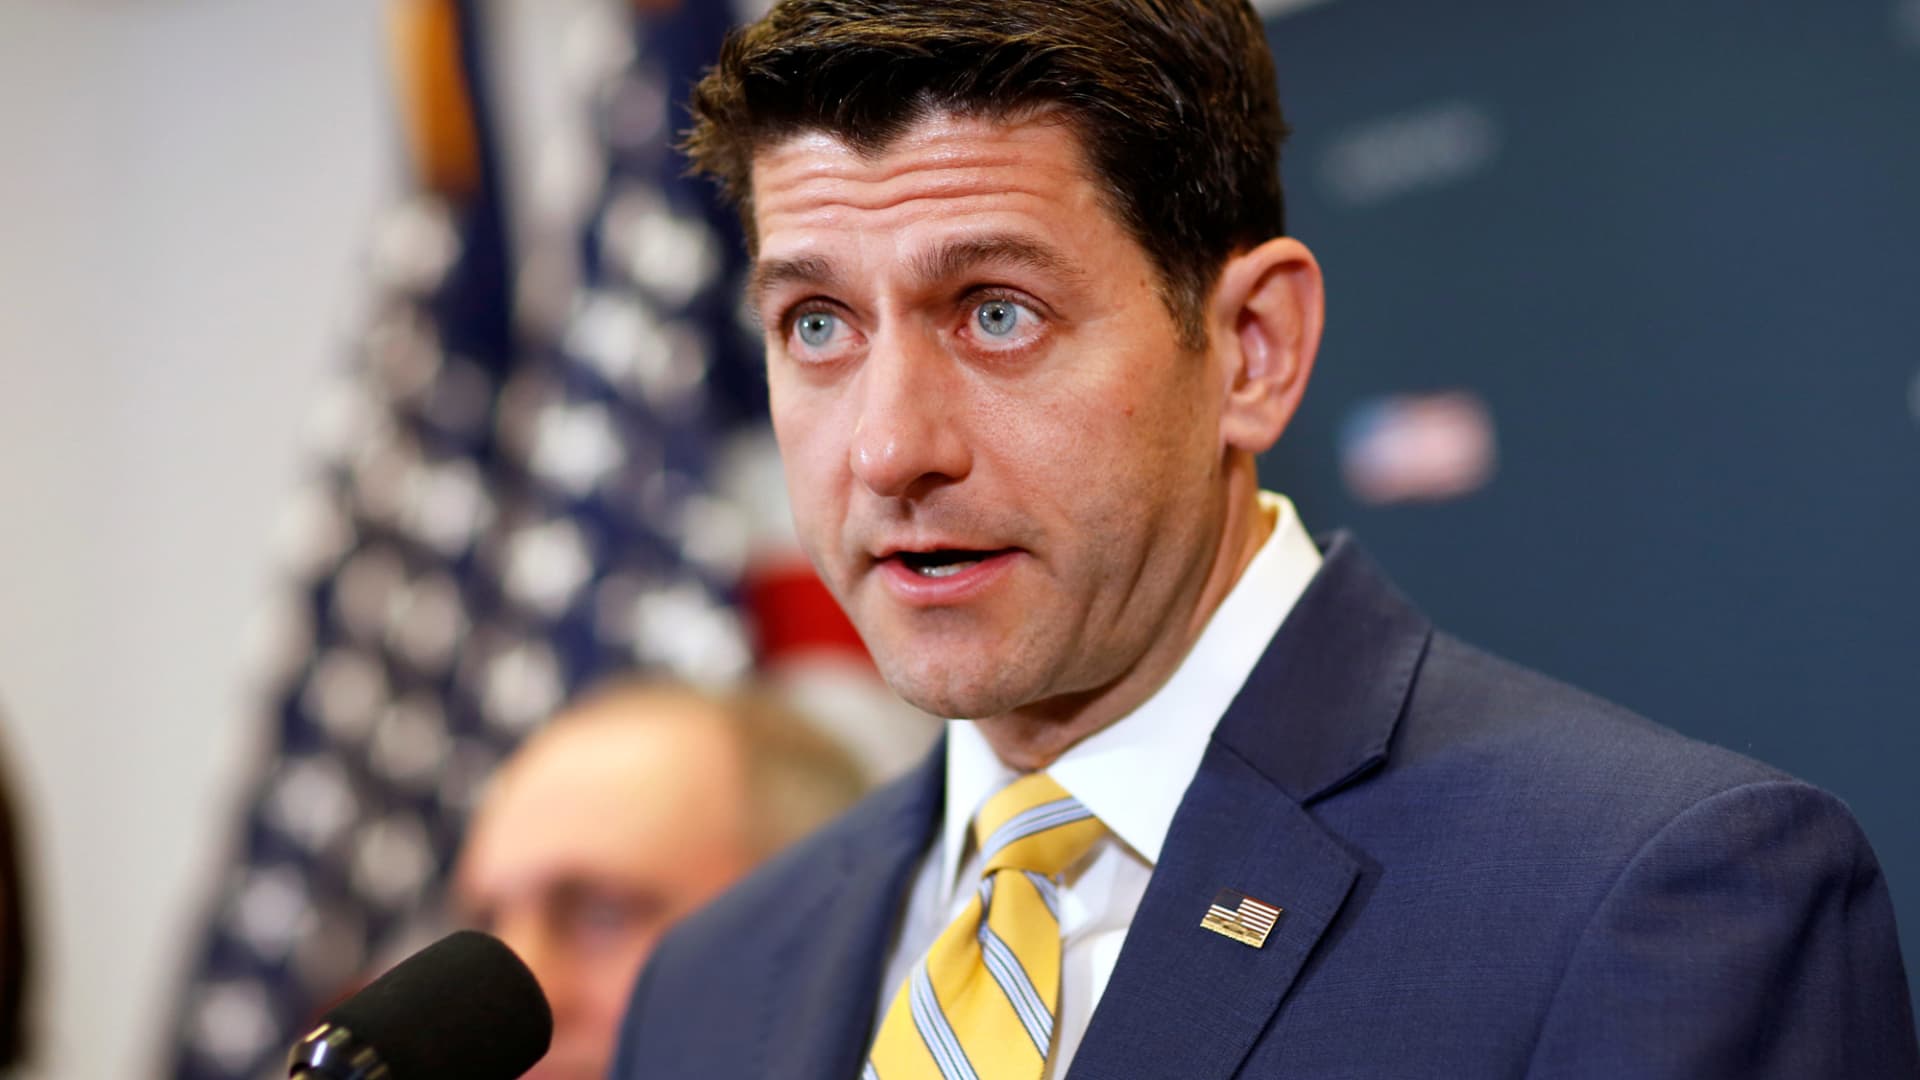 House Speaker Ryan opposes Trump's tariffs, warns of 'unintended consequences'